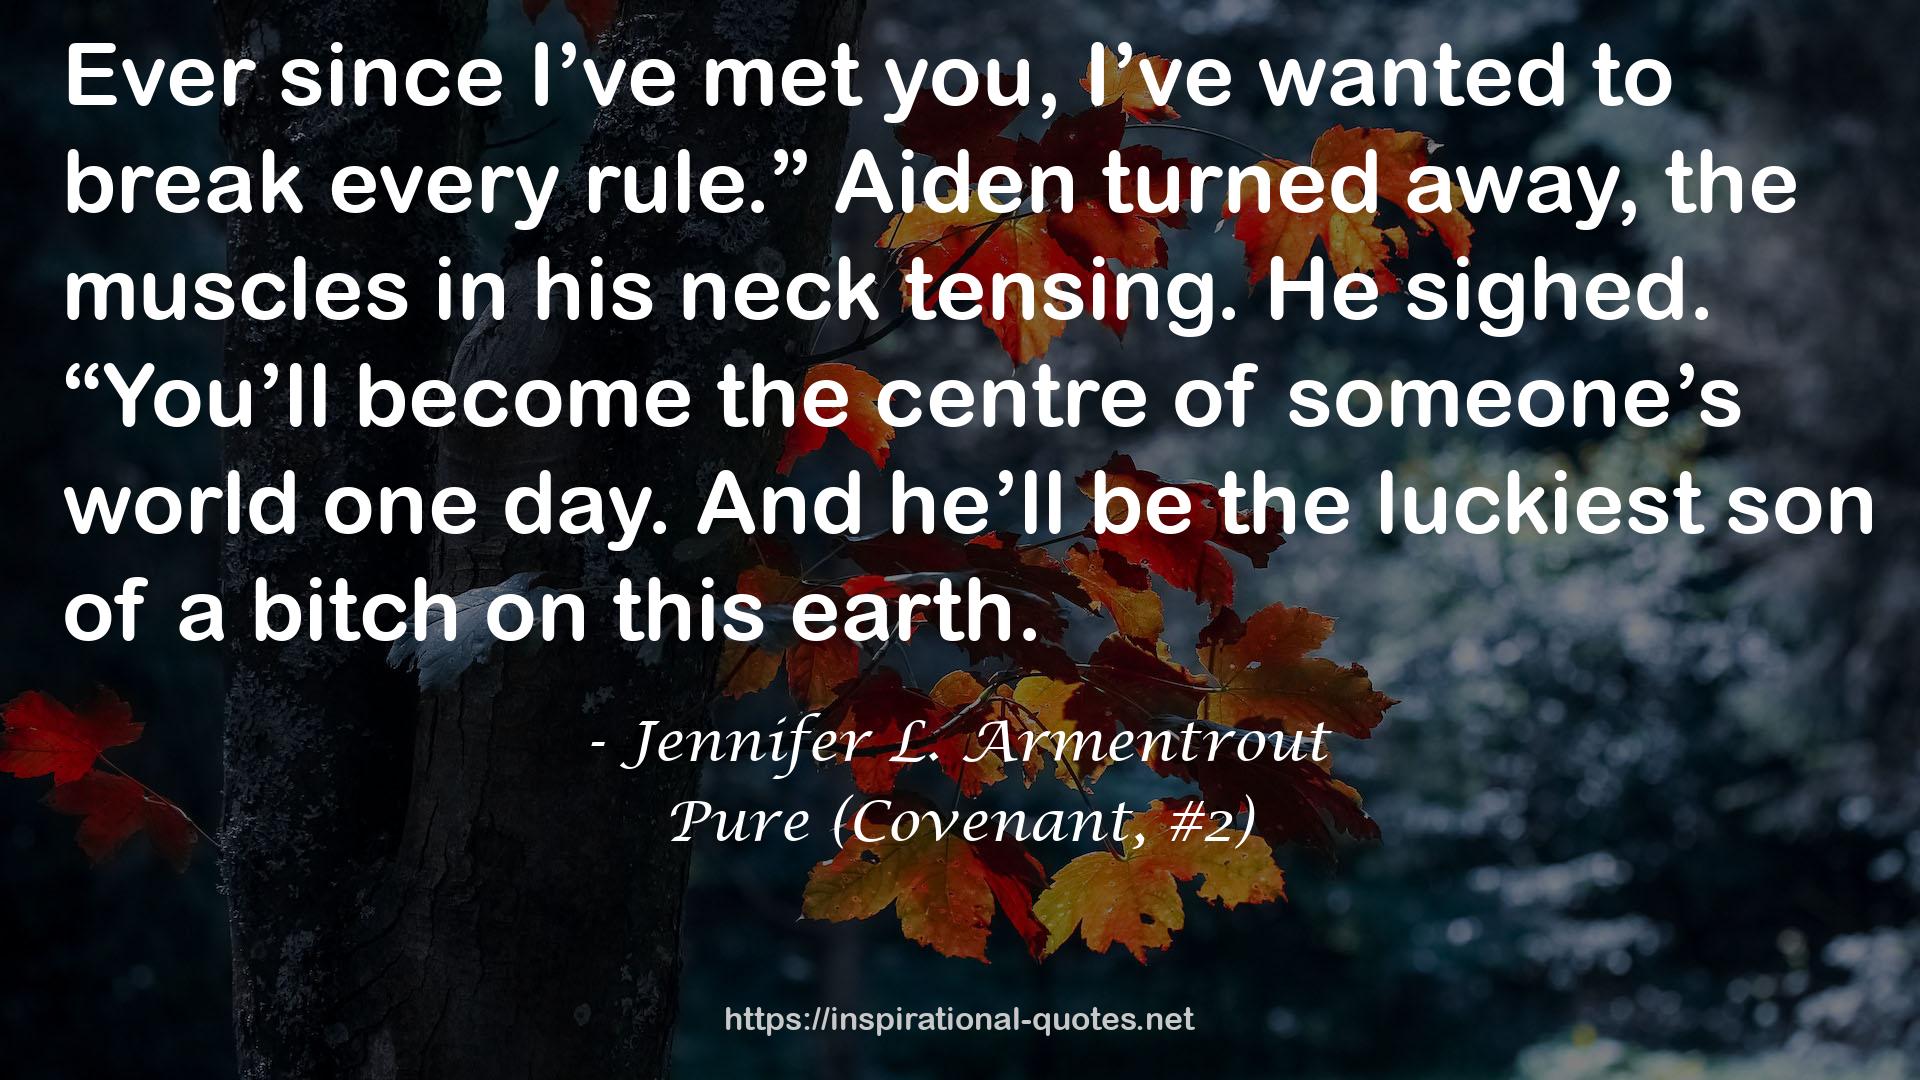 Pure (Covenant, #2) QUOTES